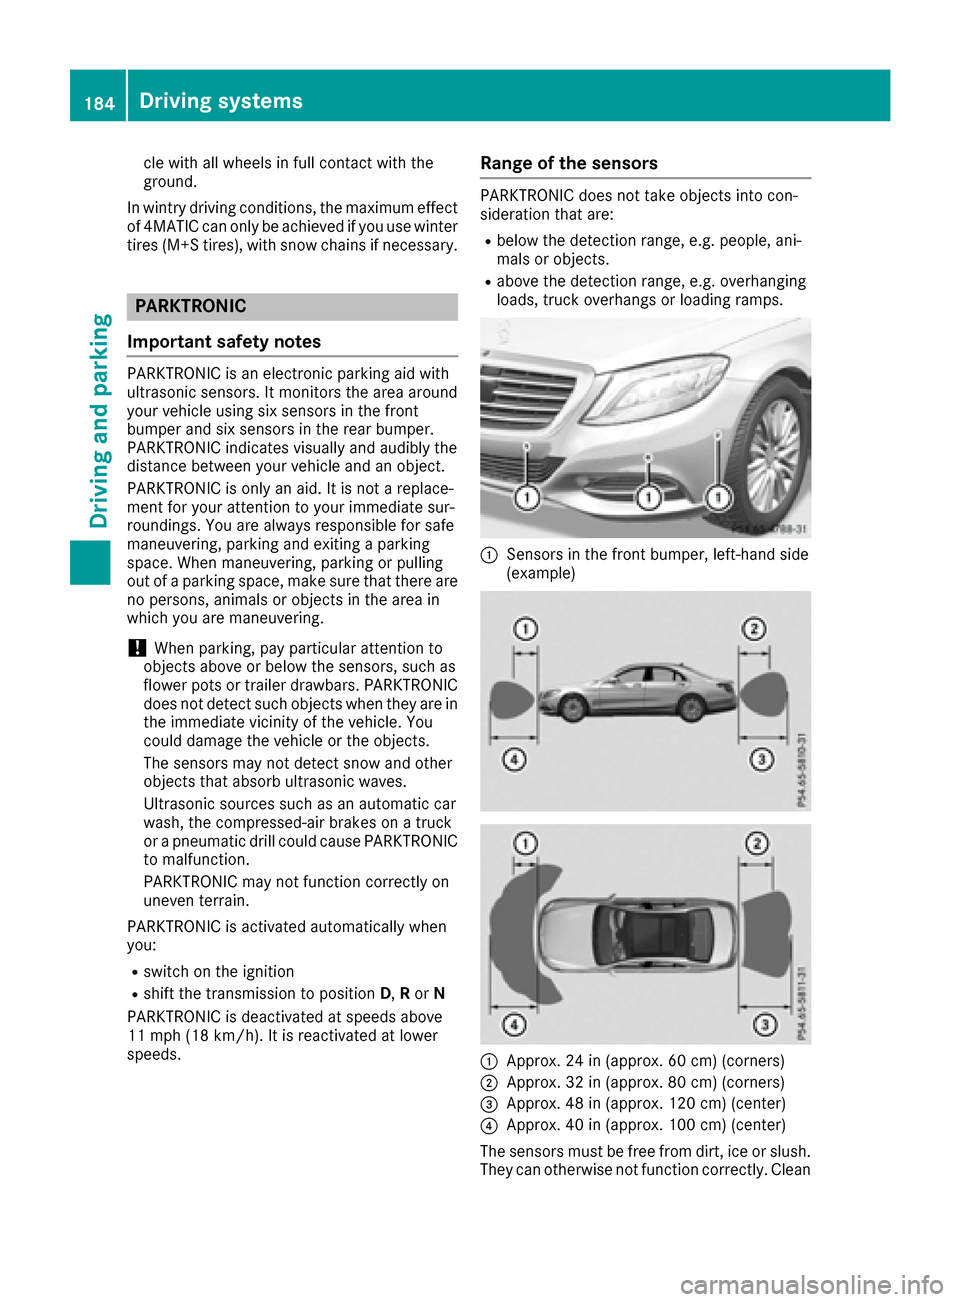 MERCEDES-BENZ S-Class MAYBACH 2017 W222 Repair Manual cle with all wheels in full contact with the
ground.
In wintry driving conditions, the maximum effect
of 4MATIC can only be achieved if you use winter
tires (M+S tires), with snow chains if necessary.